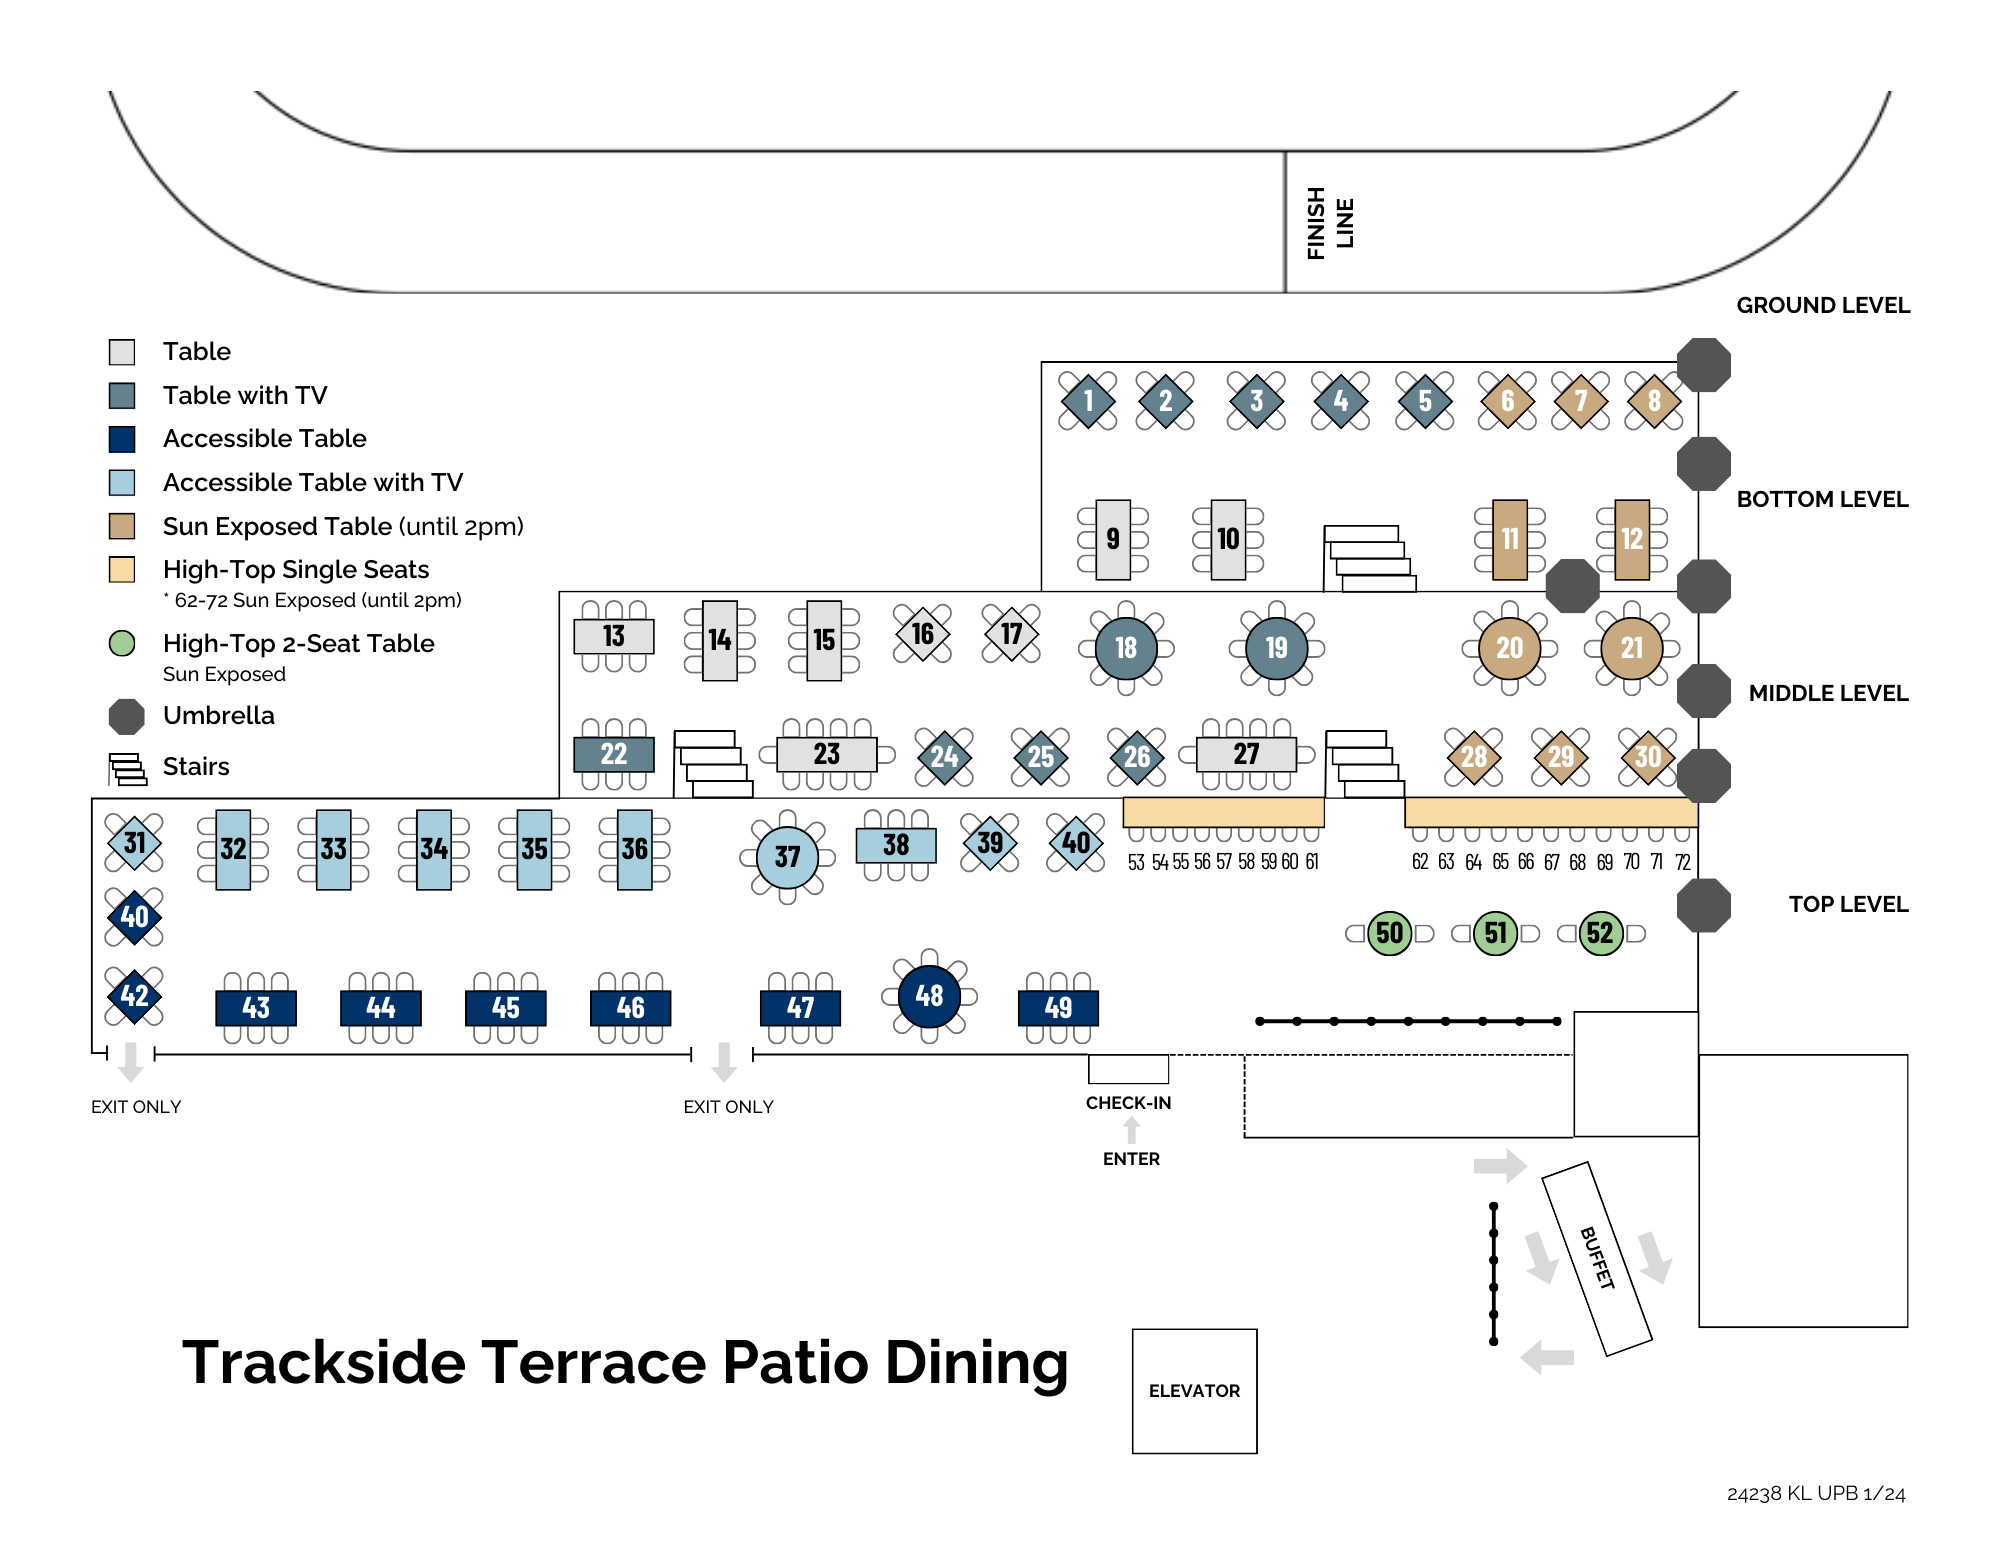 Trackside Seating Map